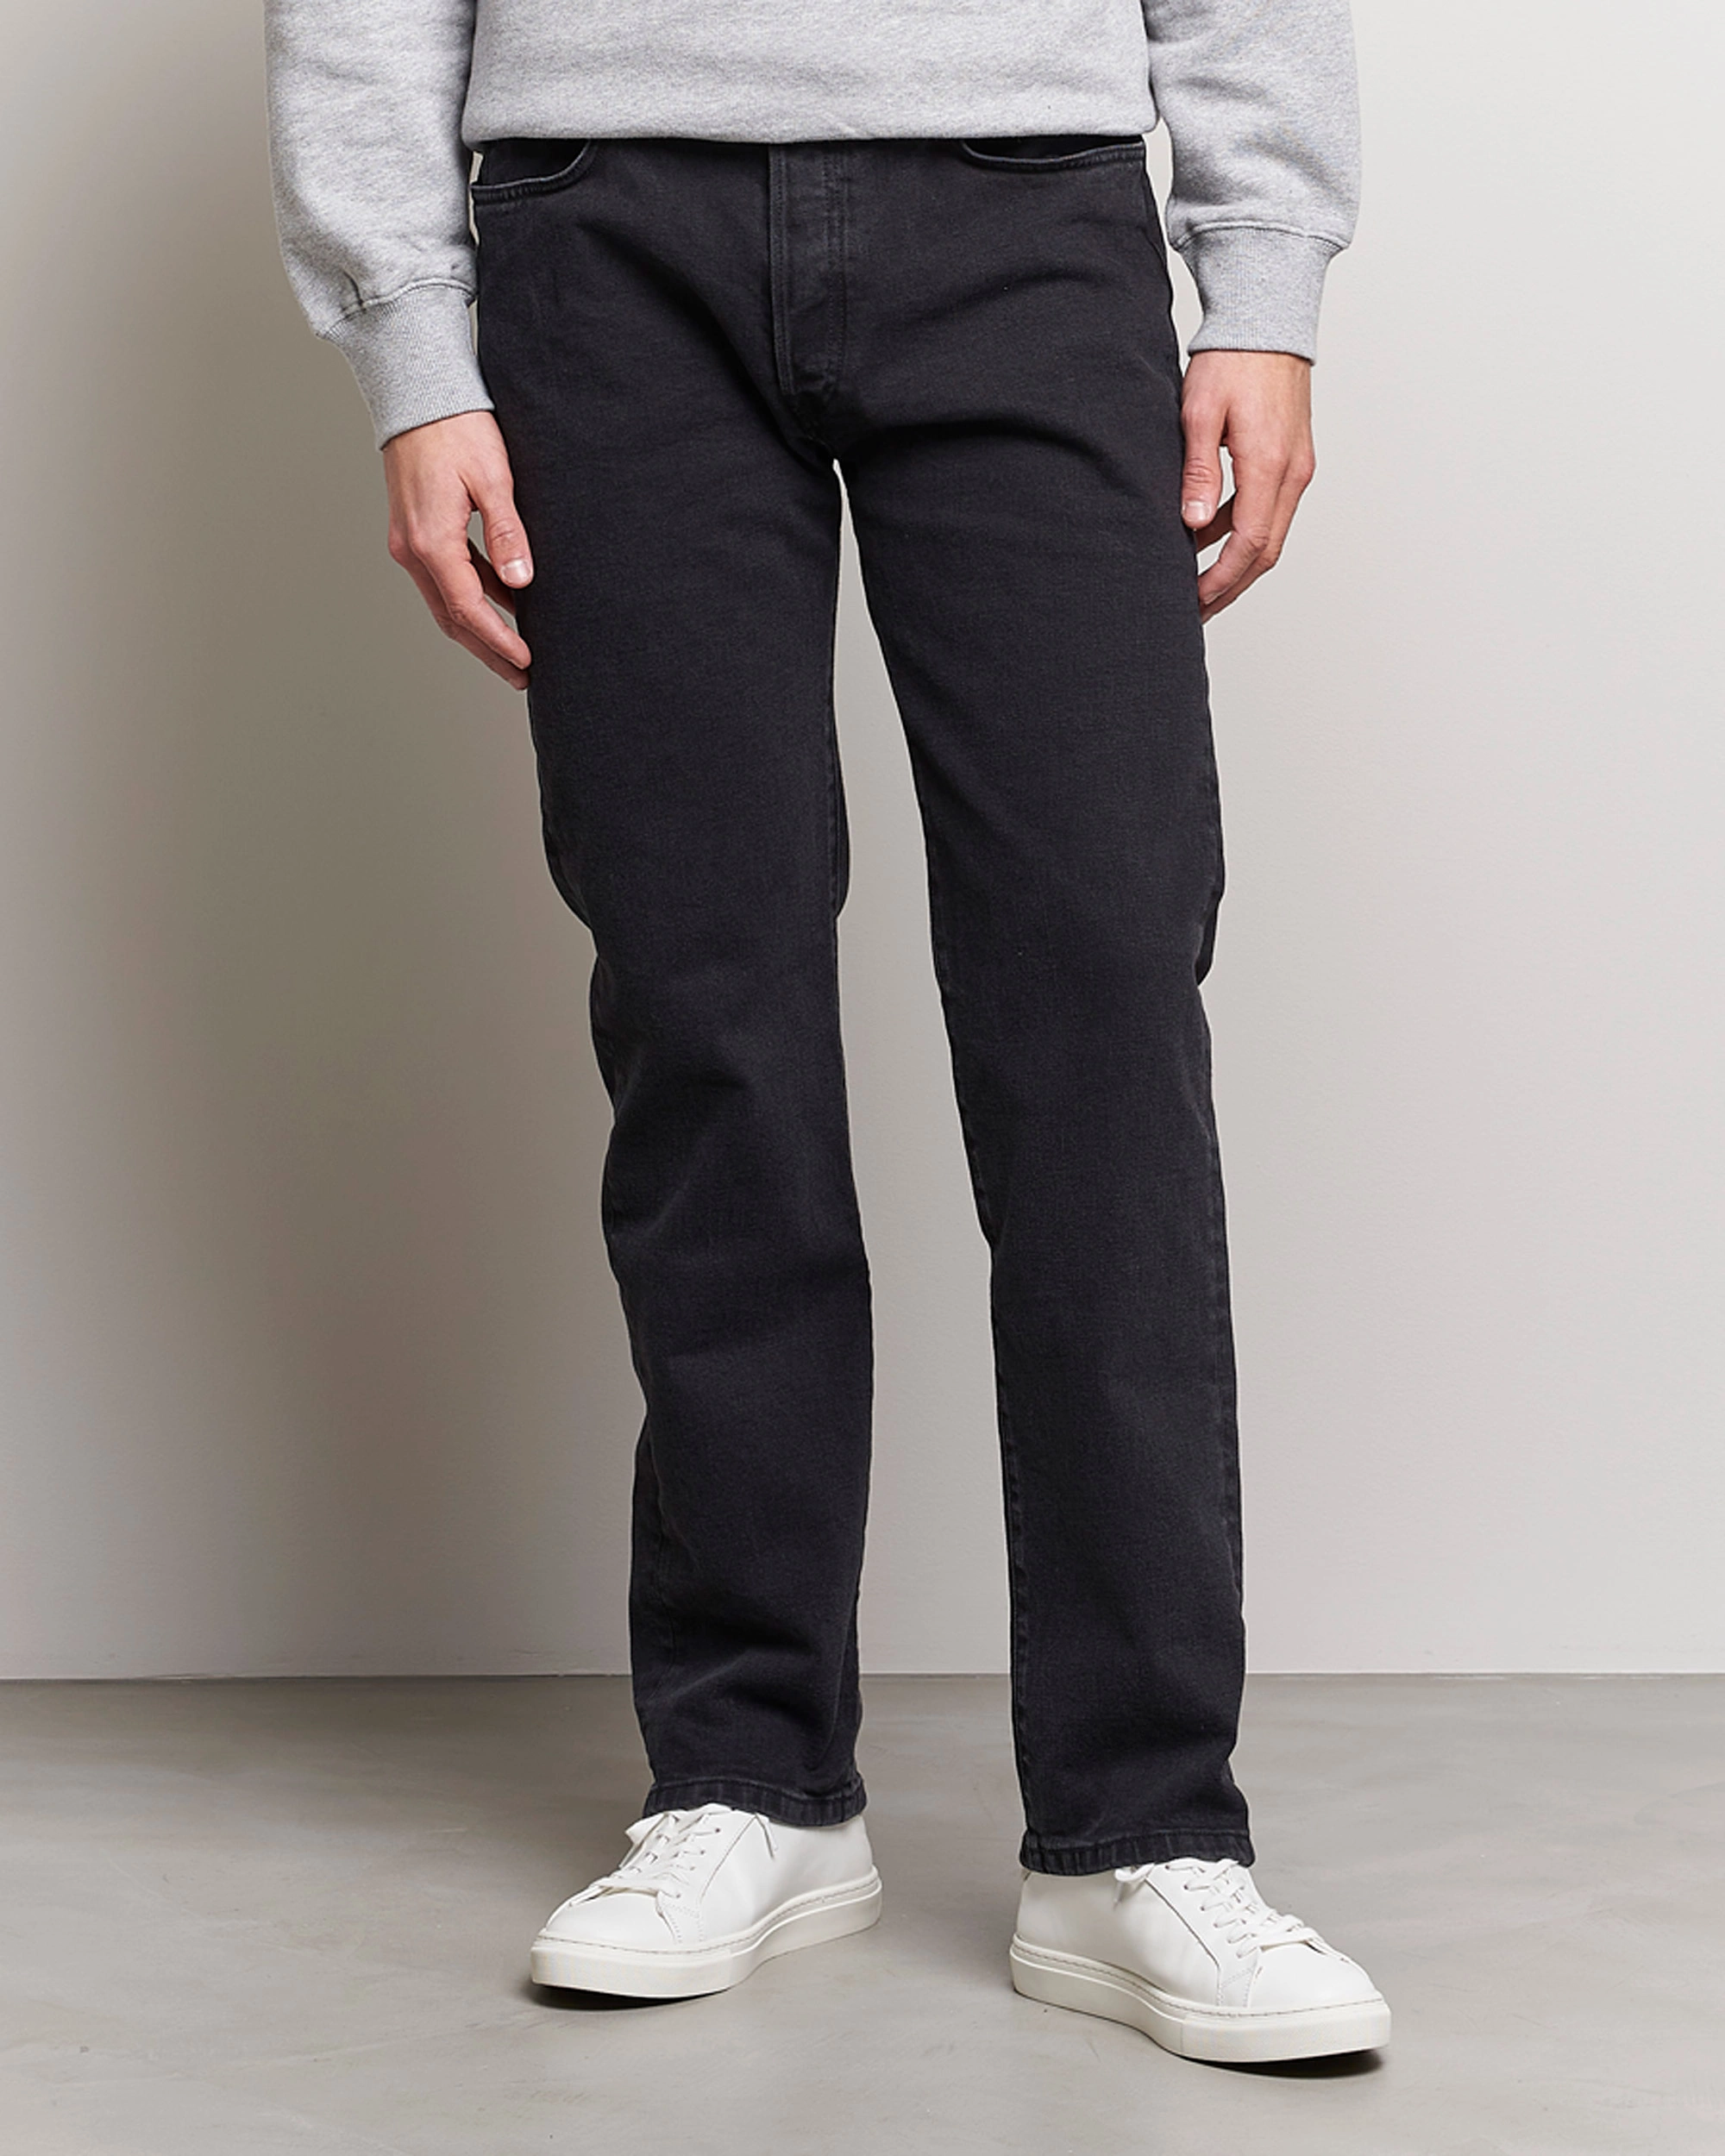 Homme | Contemporary Creators | Jeanerica | CM002 Classic Jeans Black 2 Weeks